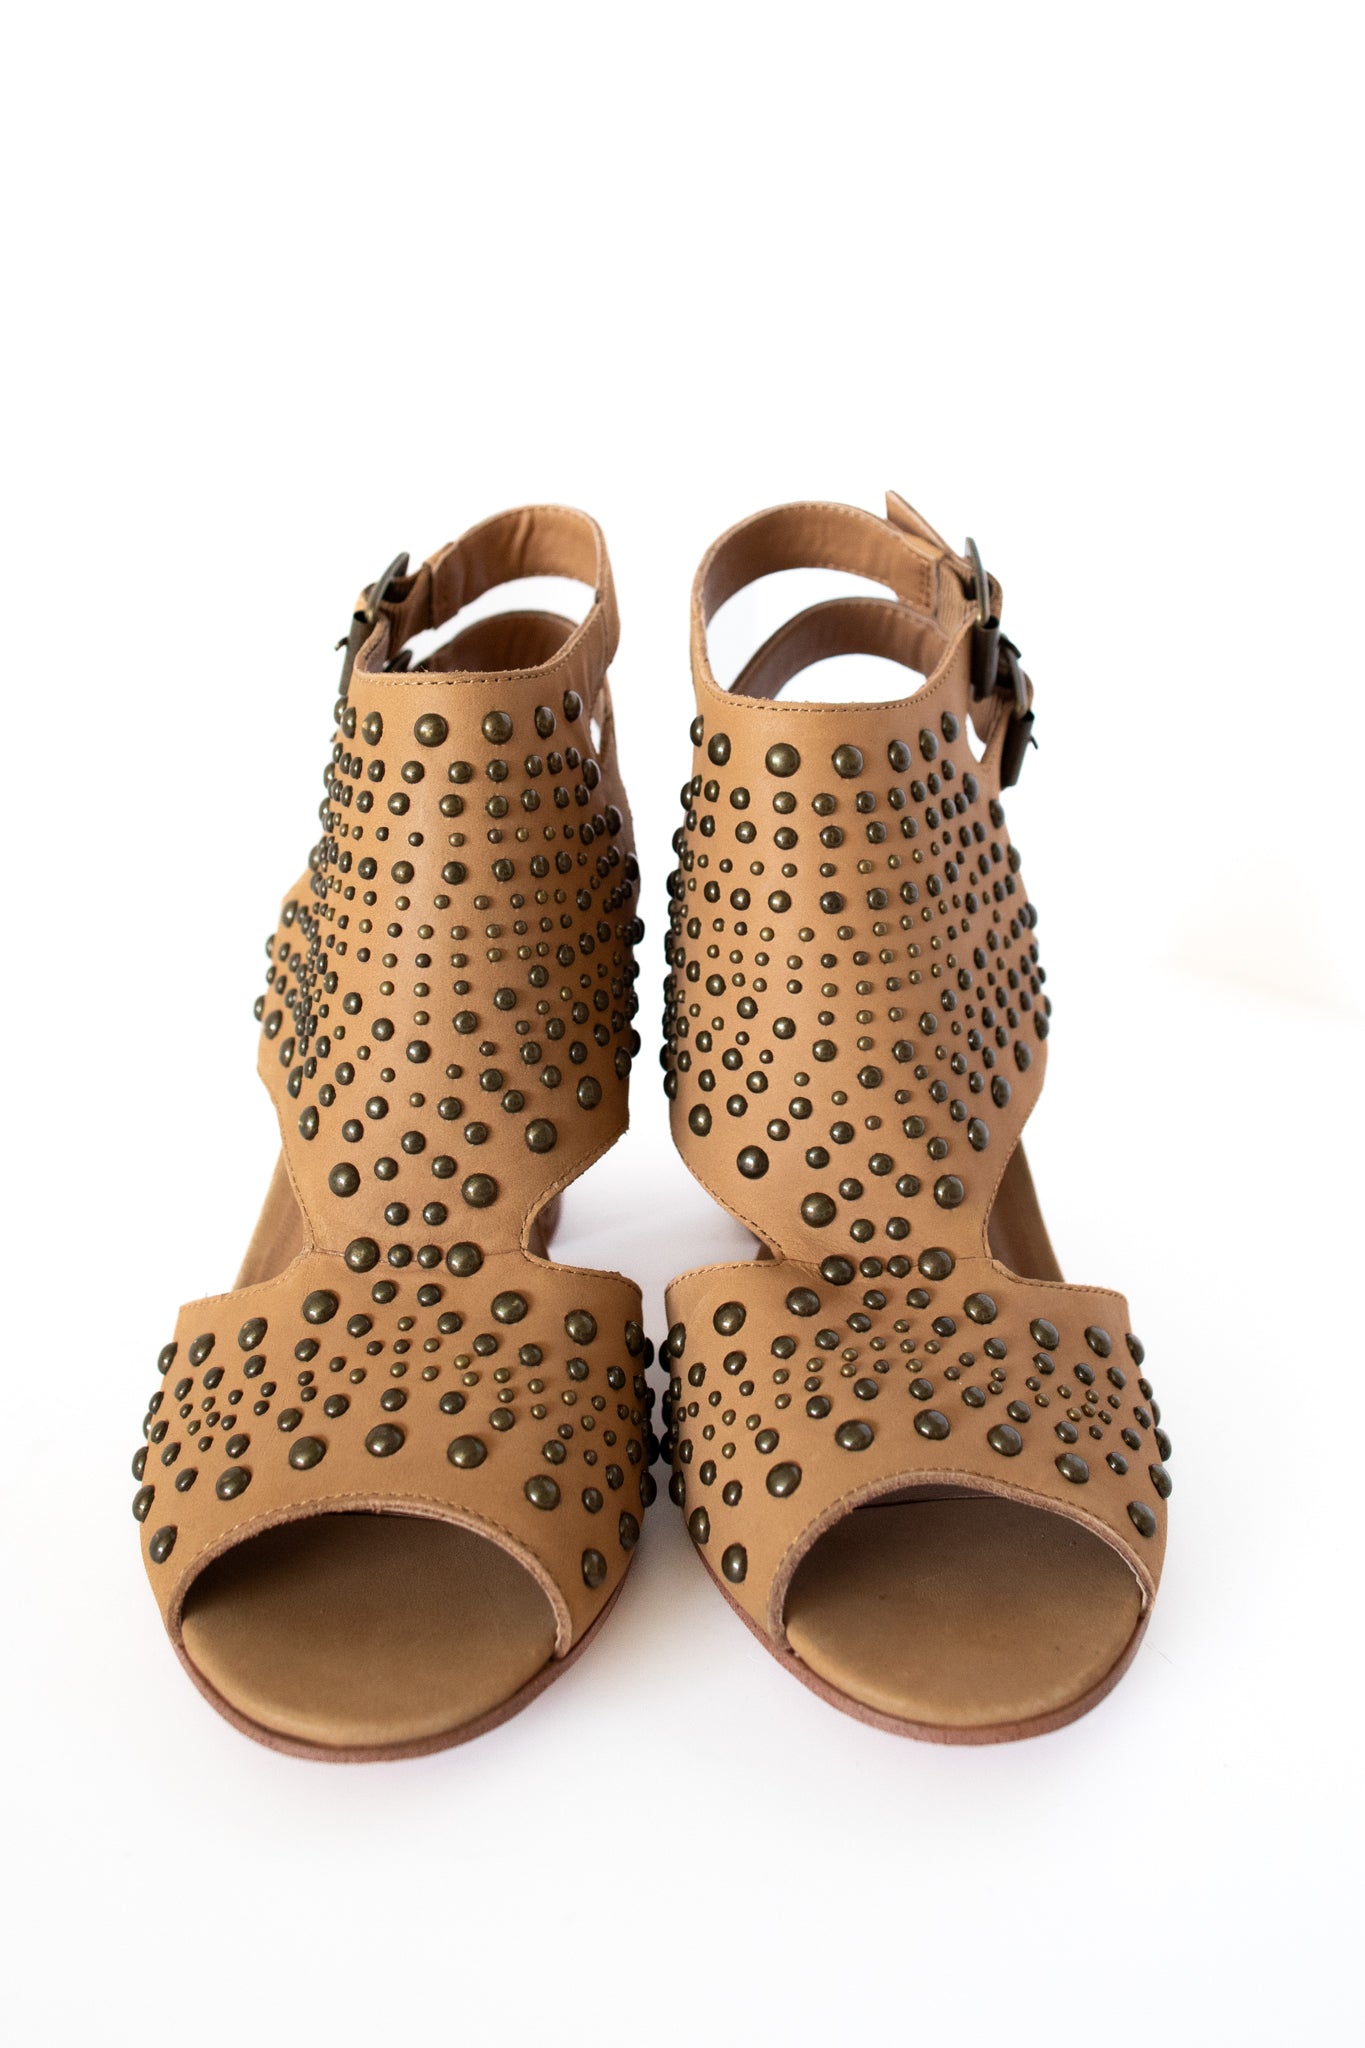 Christina Studded Heeled Sandals in Tan